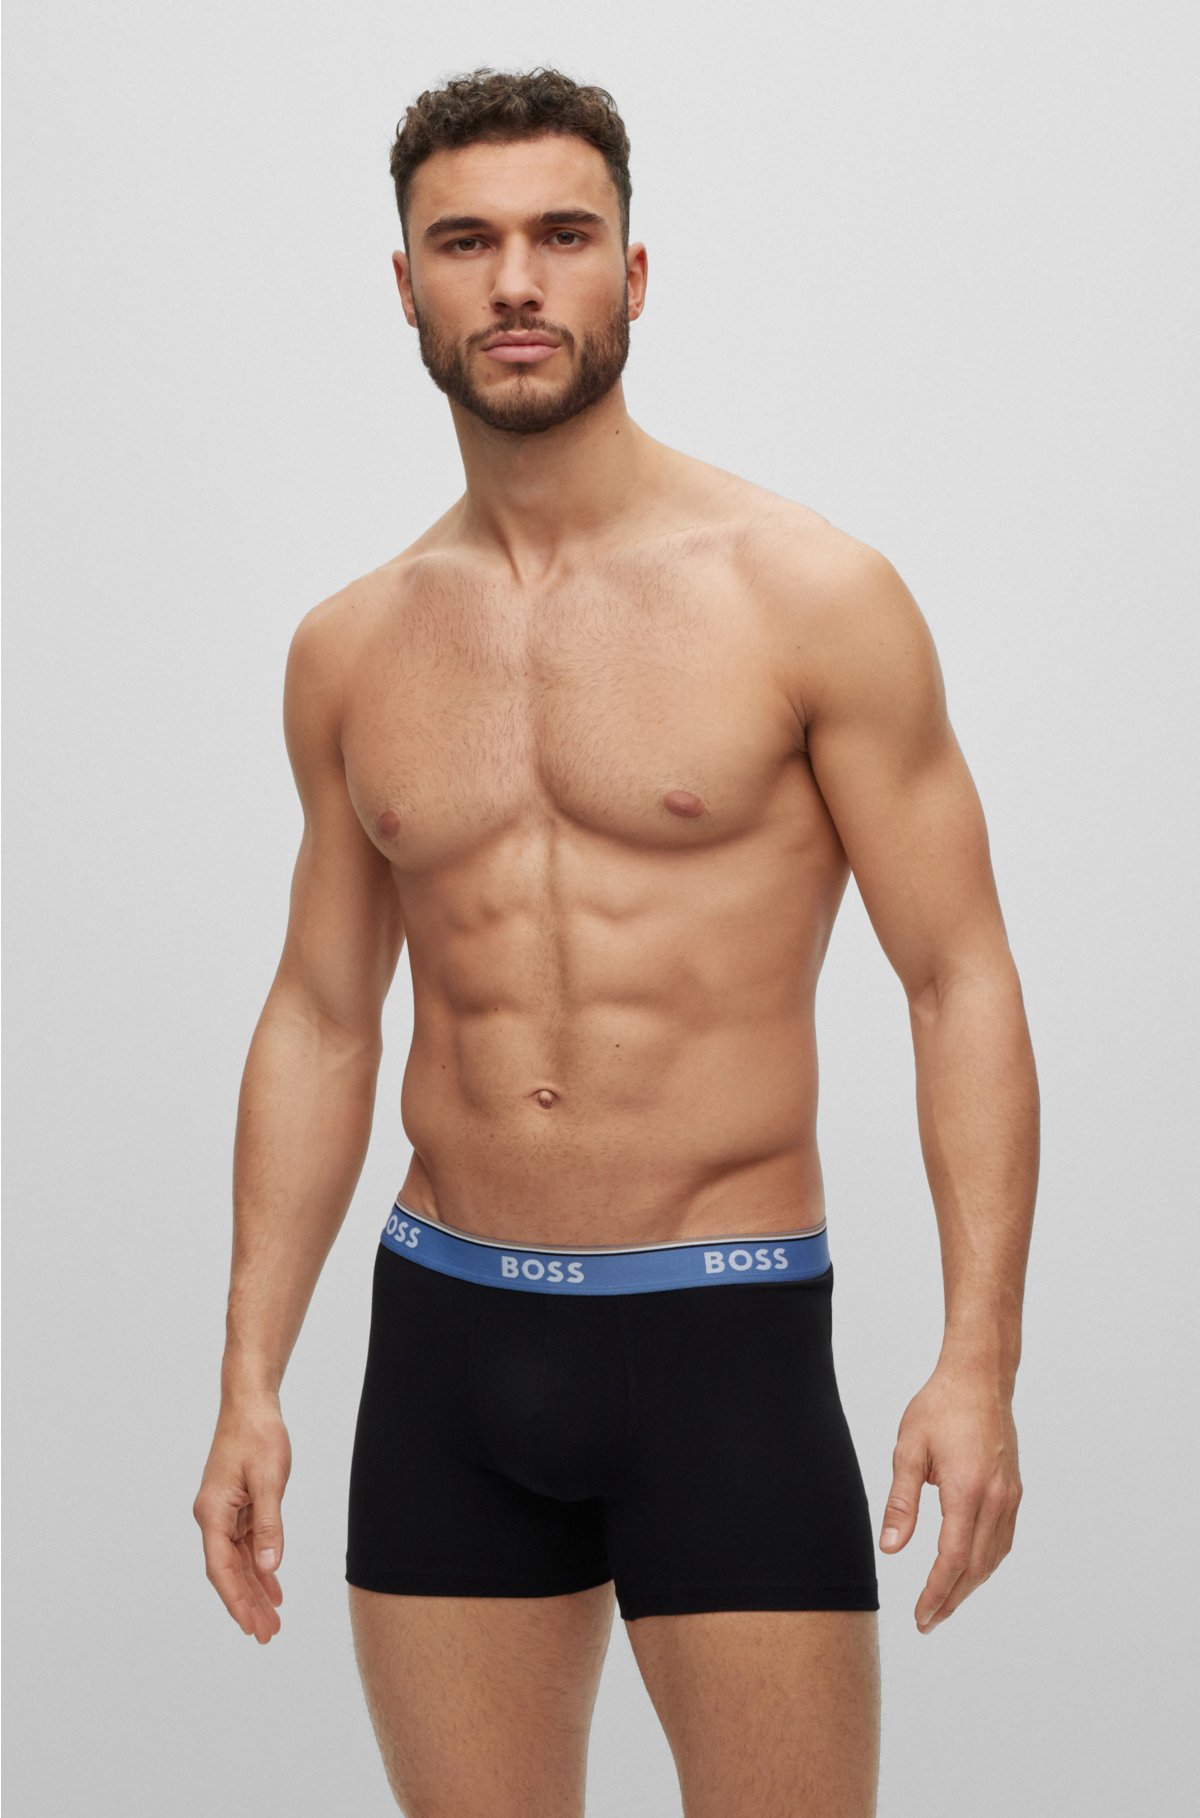 BOSS Three-pack with briefs waistbands of - boxer logo